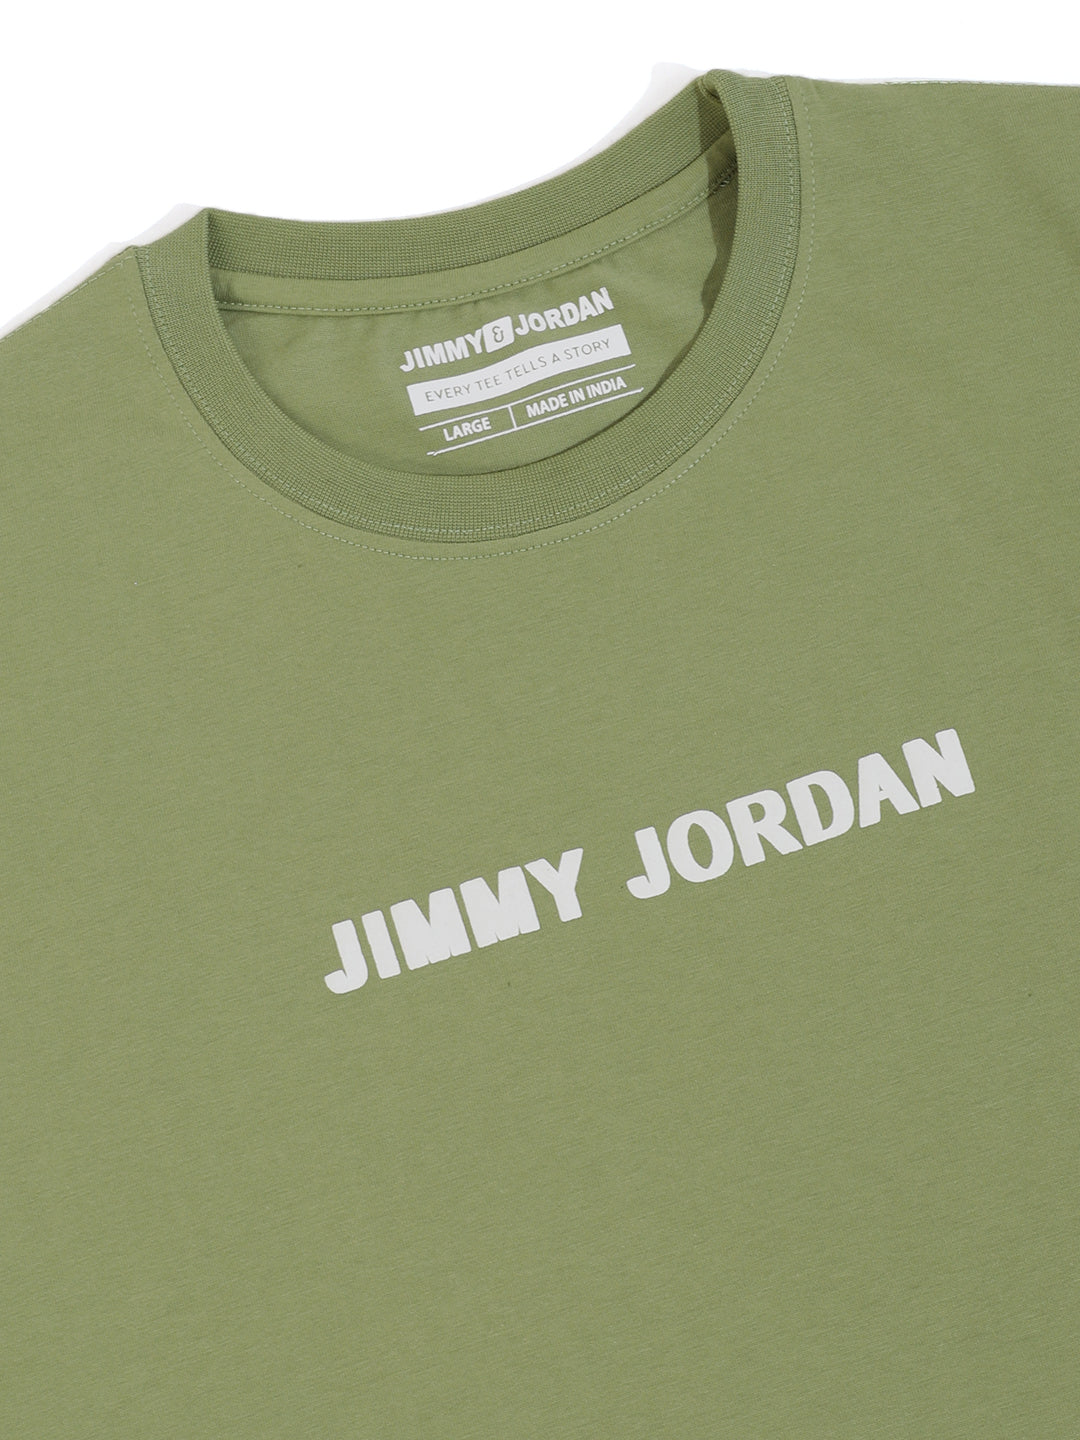 The Square Oversized Green T-Shirt